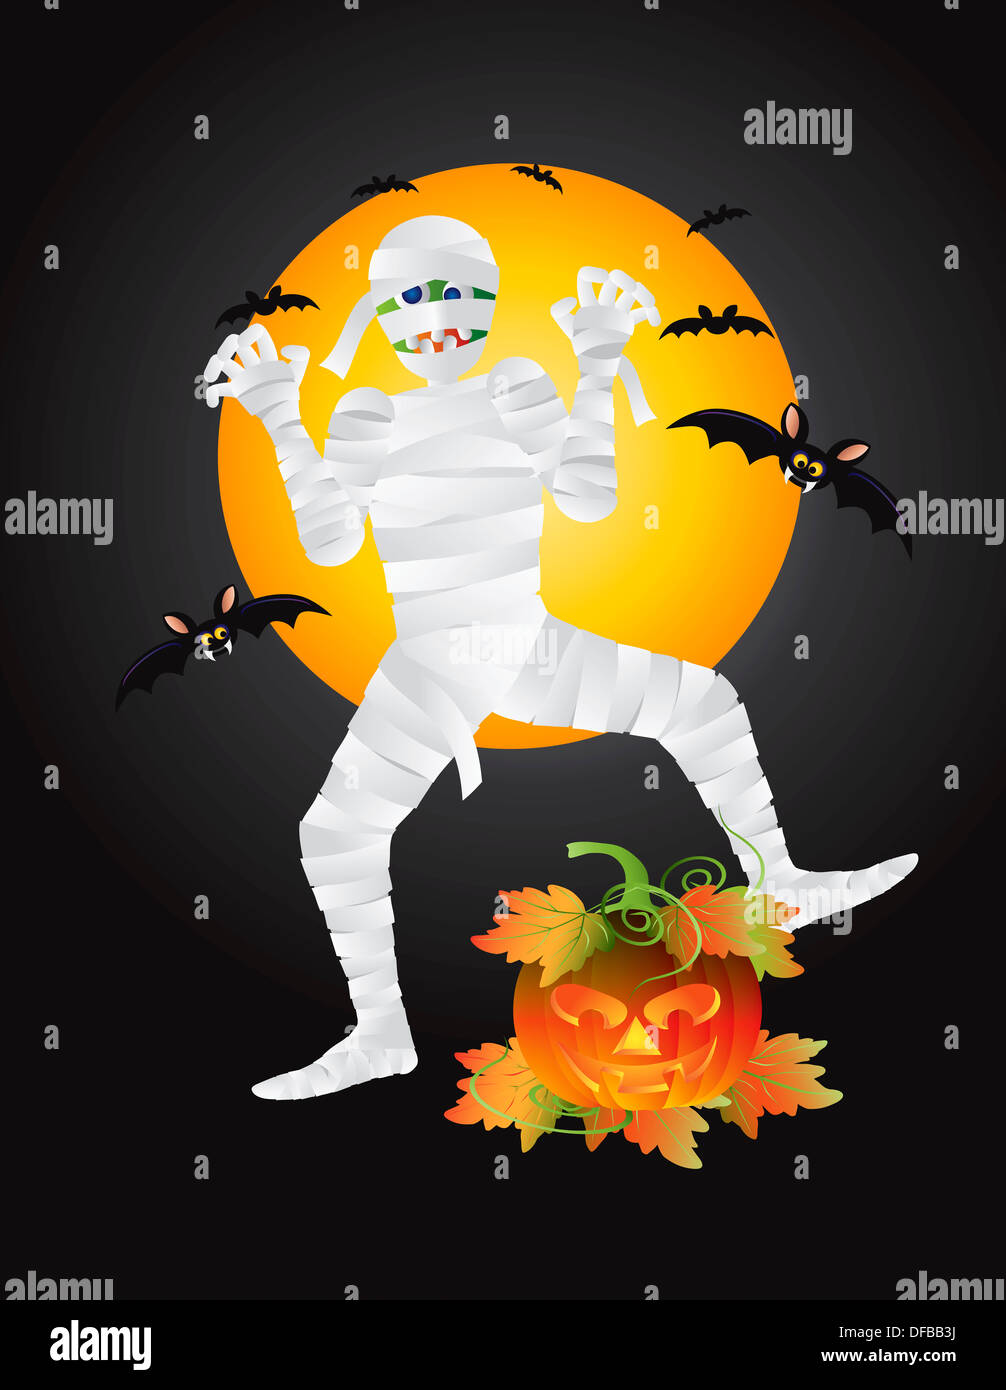 Halloween Mummy with Carved Jack-O-Lantern Pumpkin with Moon and Bats Illustration Stock Photo